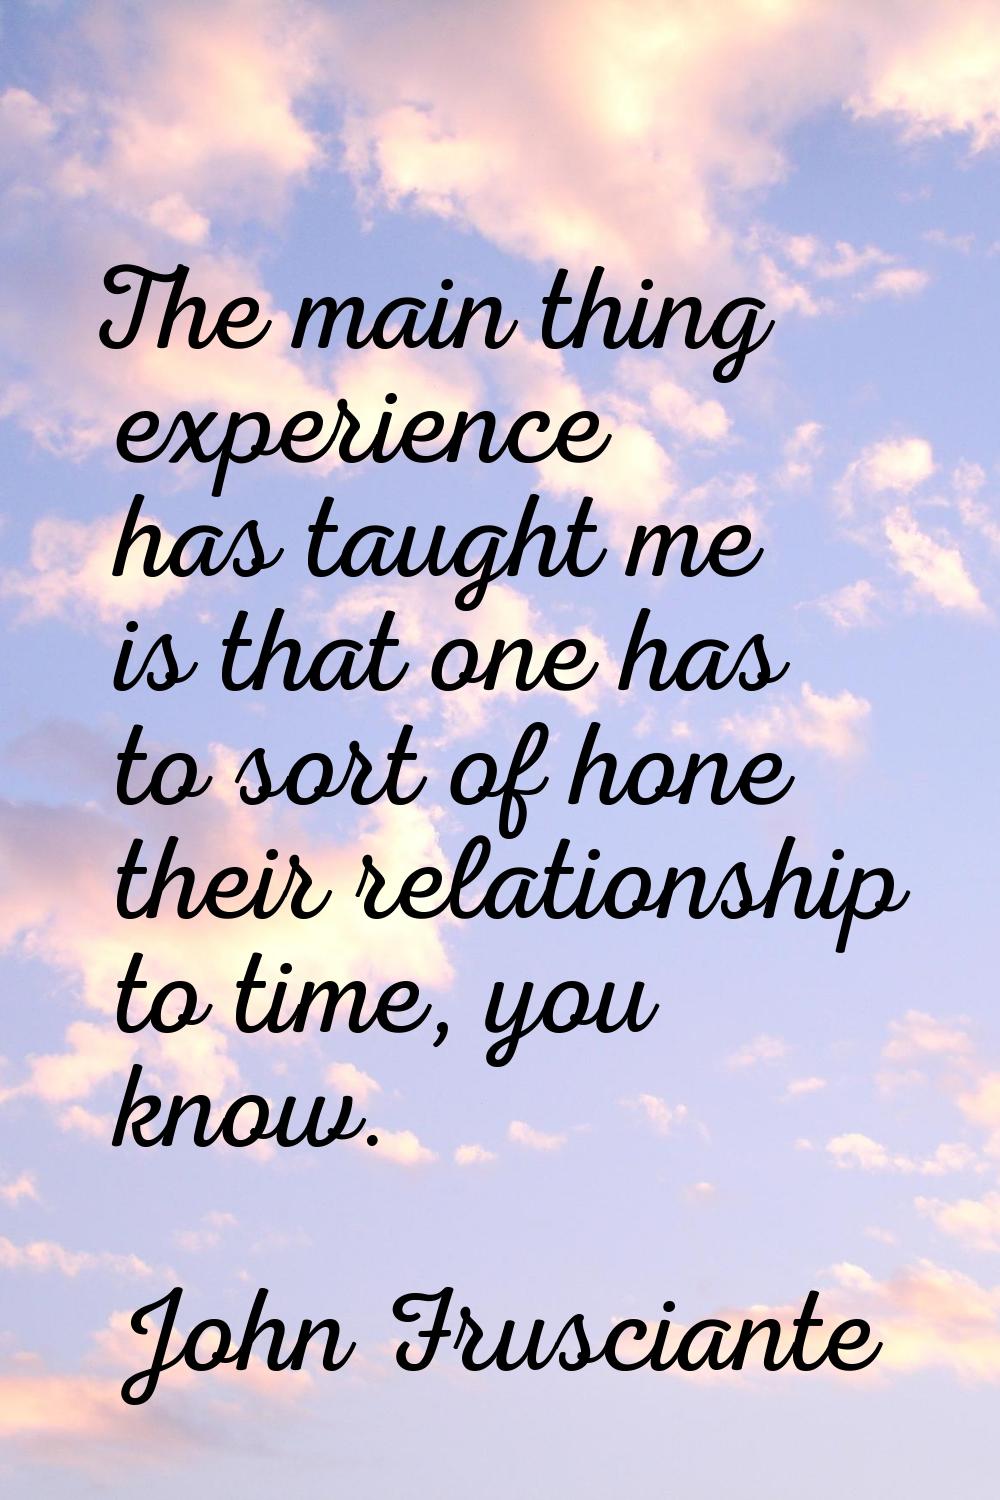 The main thing experience has taught me is that one has to sort of hone their relationship to time,